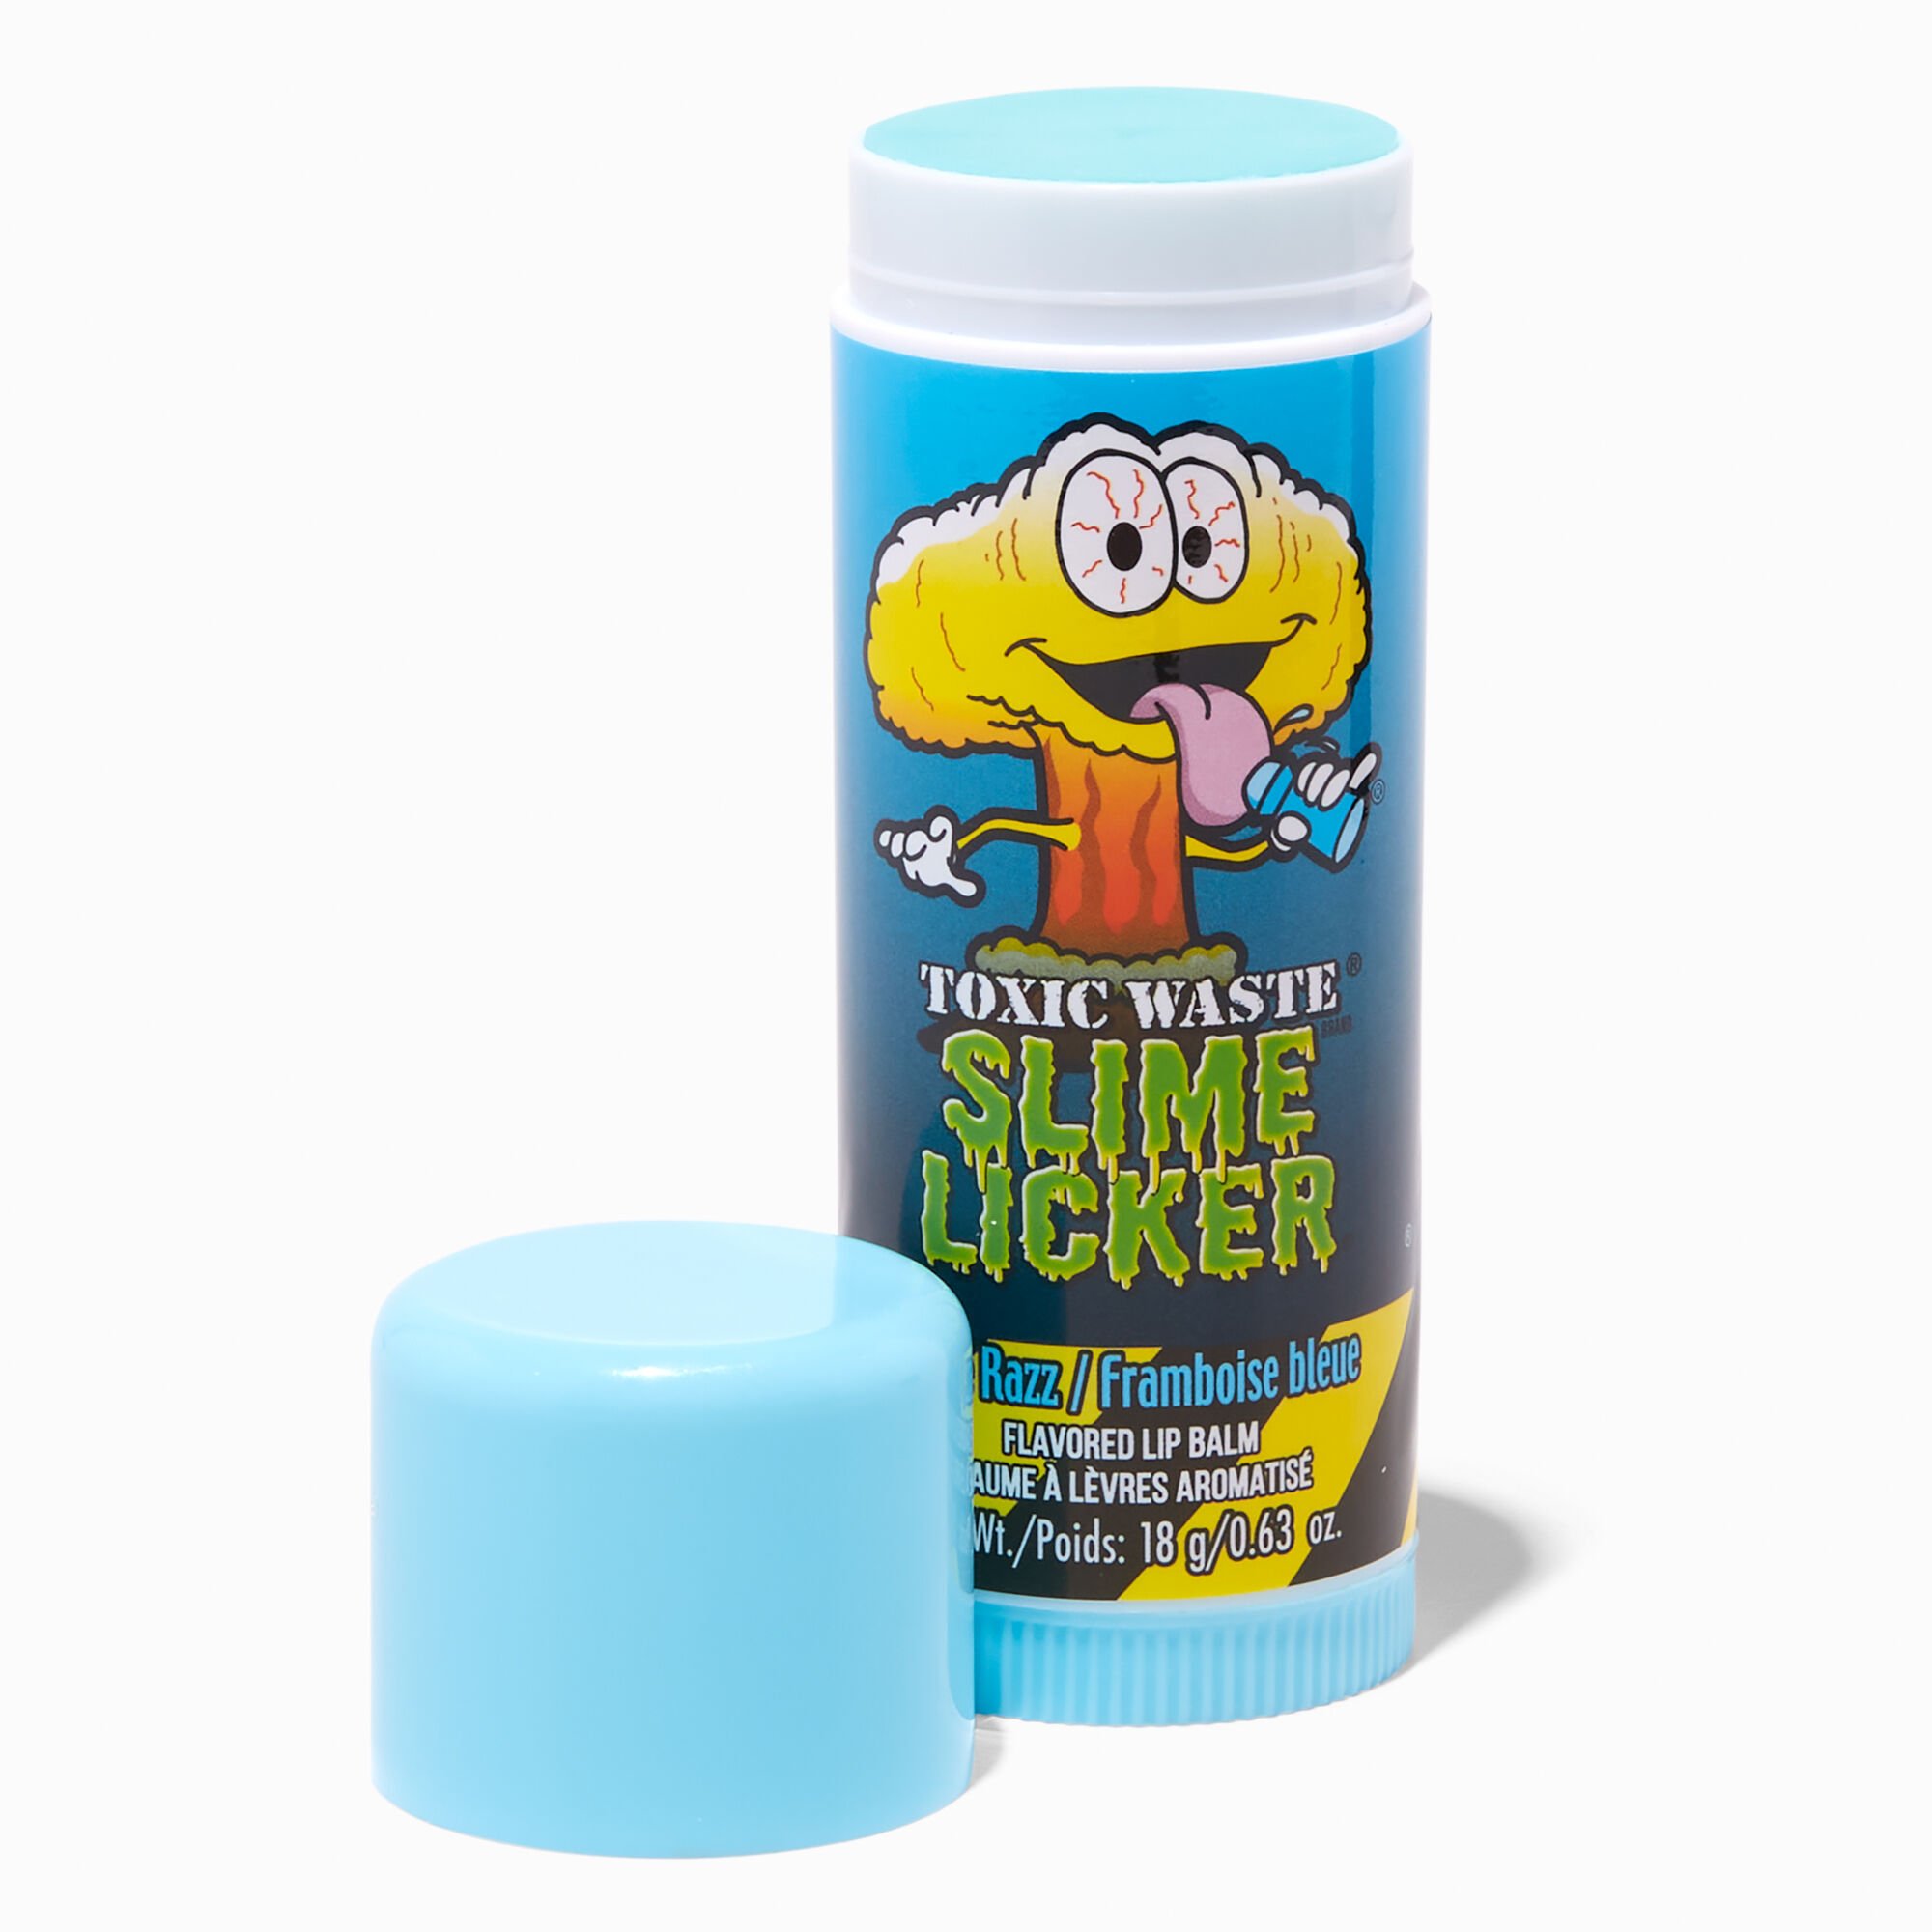 View Claires Toxic Waste Slime Licker Humongous Lip Balm Blue information